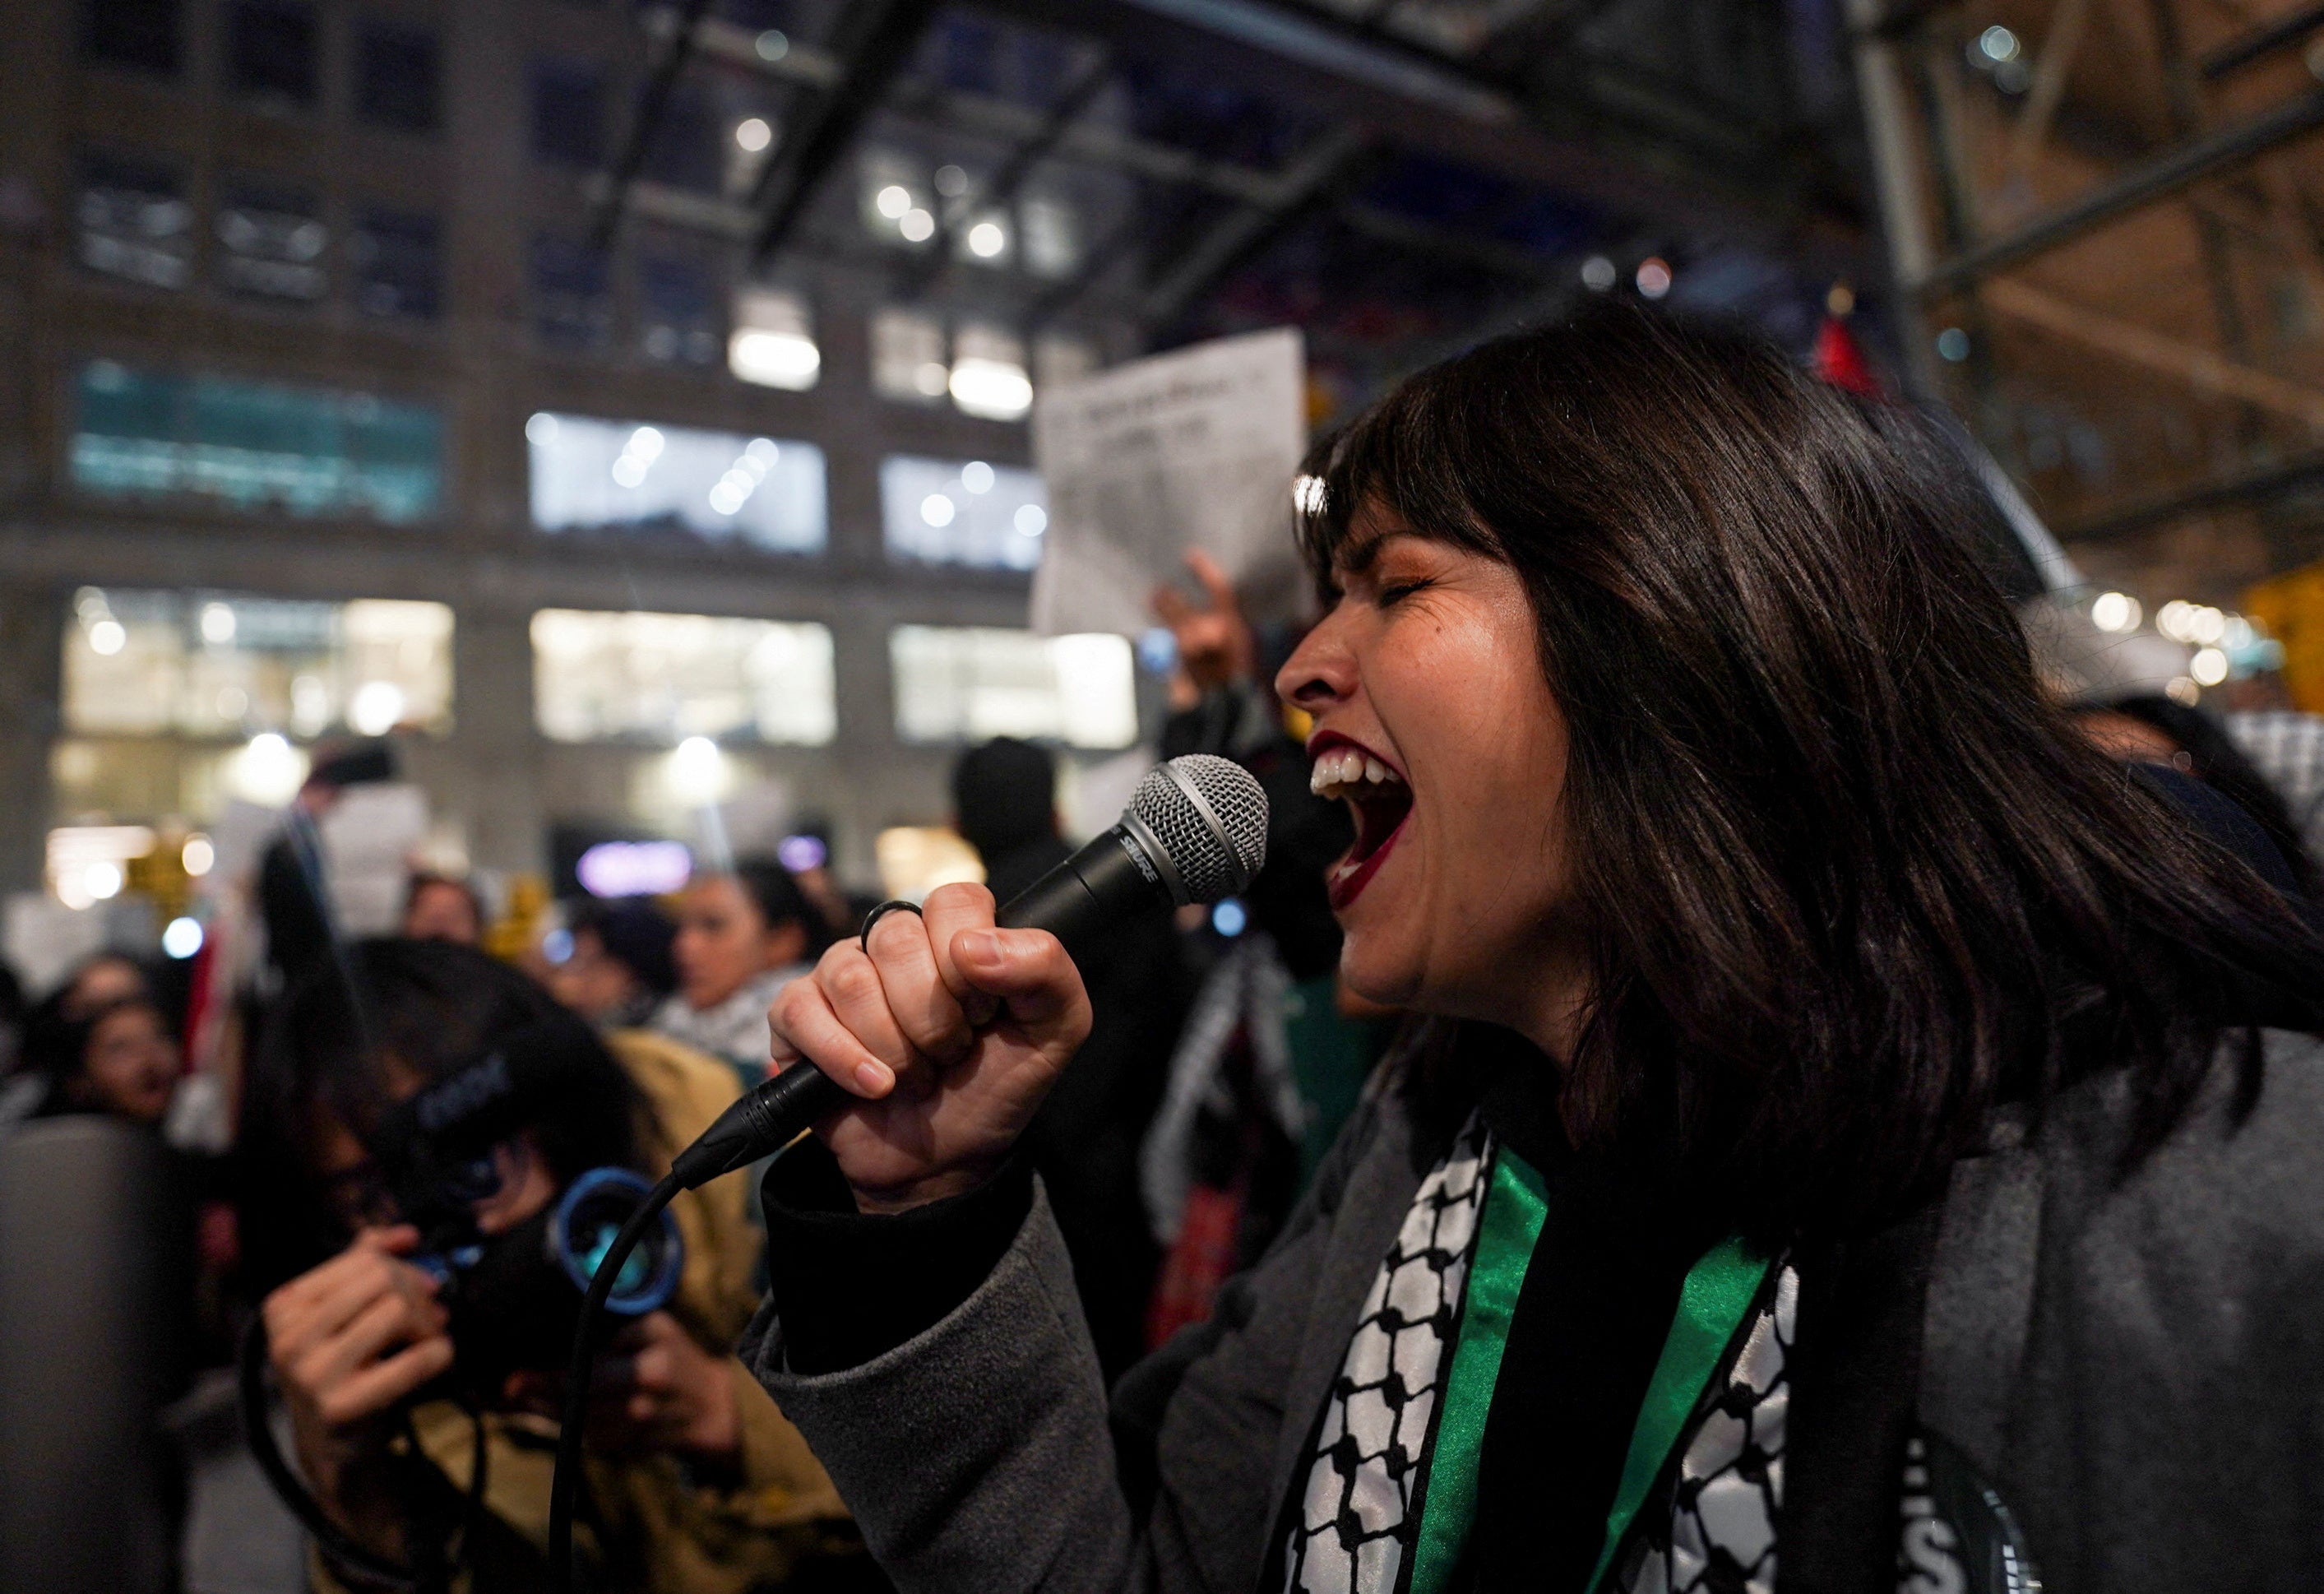 A woman uses a microphone at a rally in support of Palestinians in Gaza outside the New York Times building